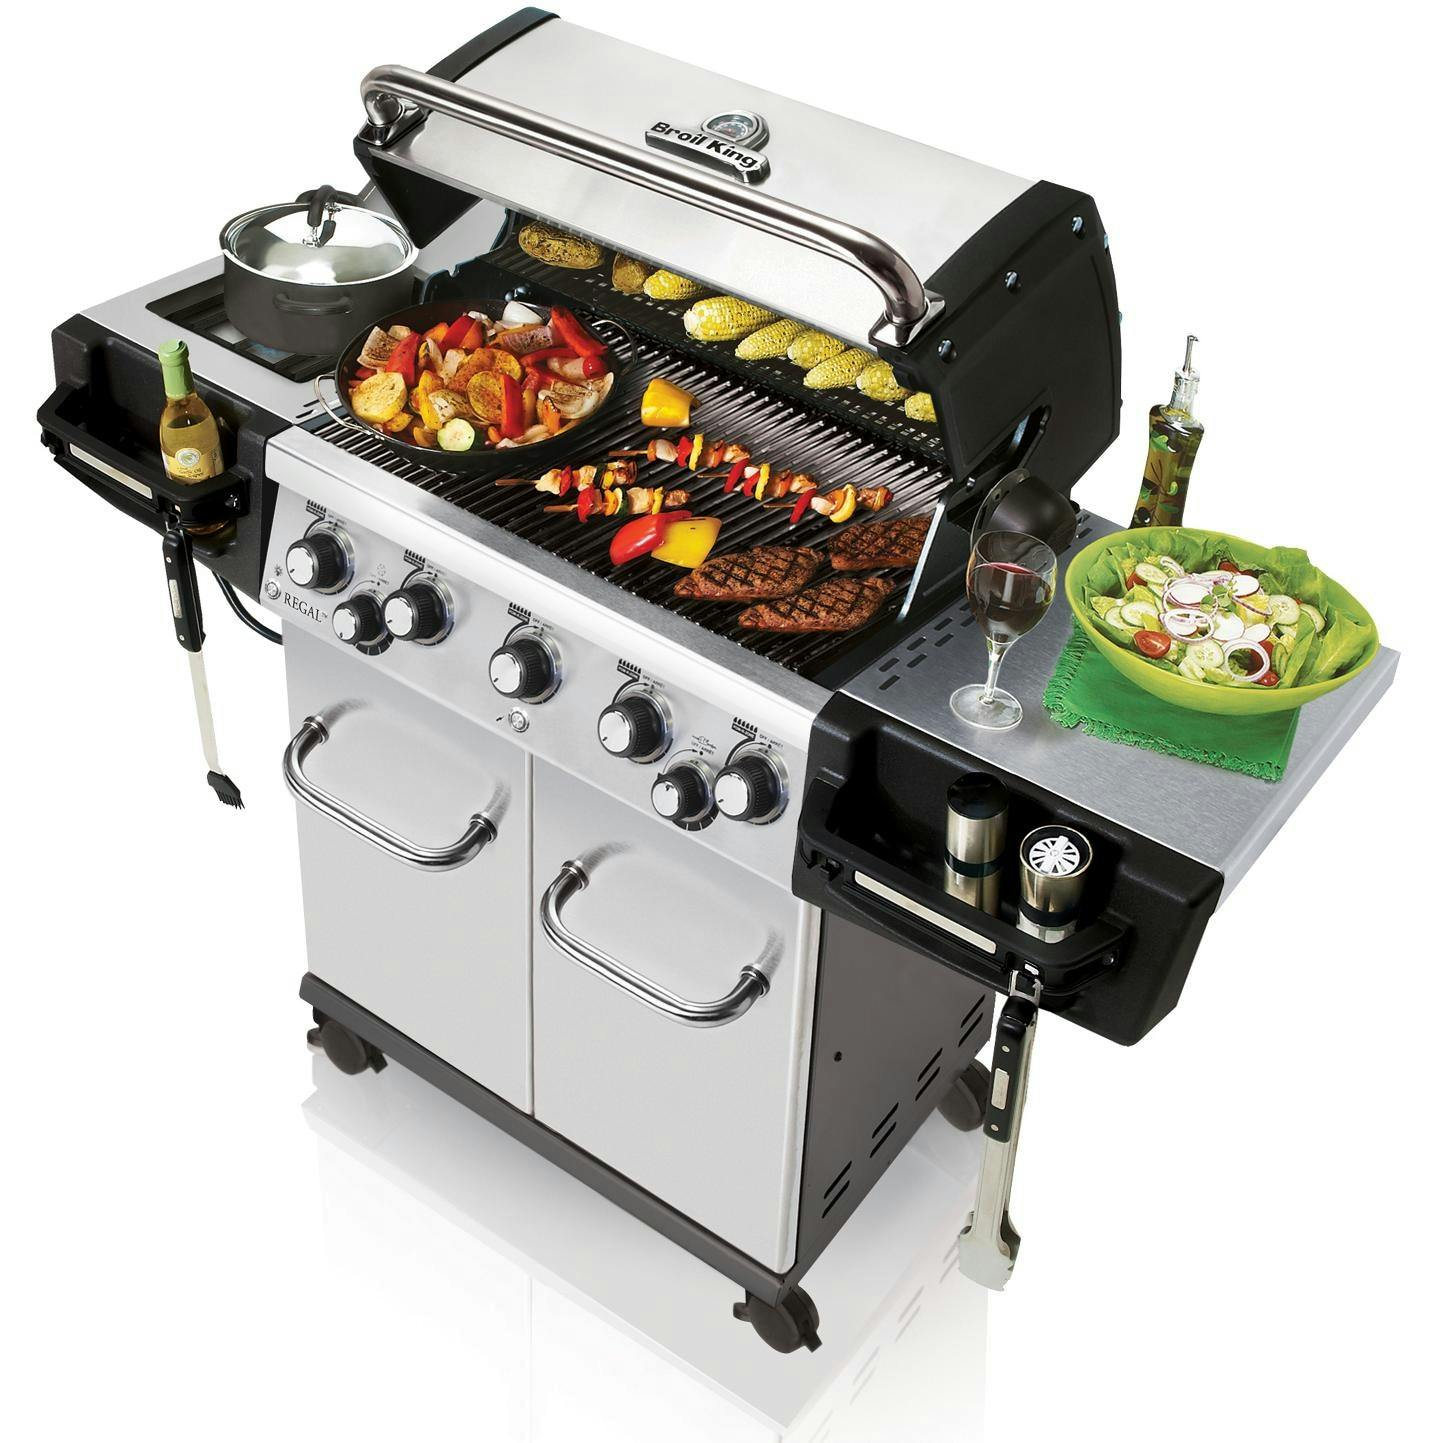 Broil King Regal Pro S590 Gas Grill with Rotisserie and Side Burner · Propane